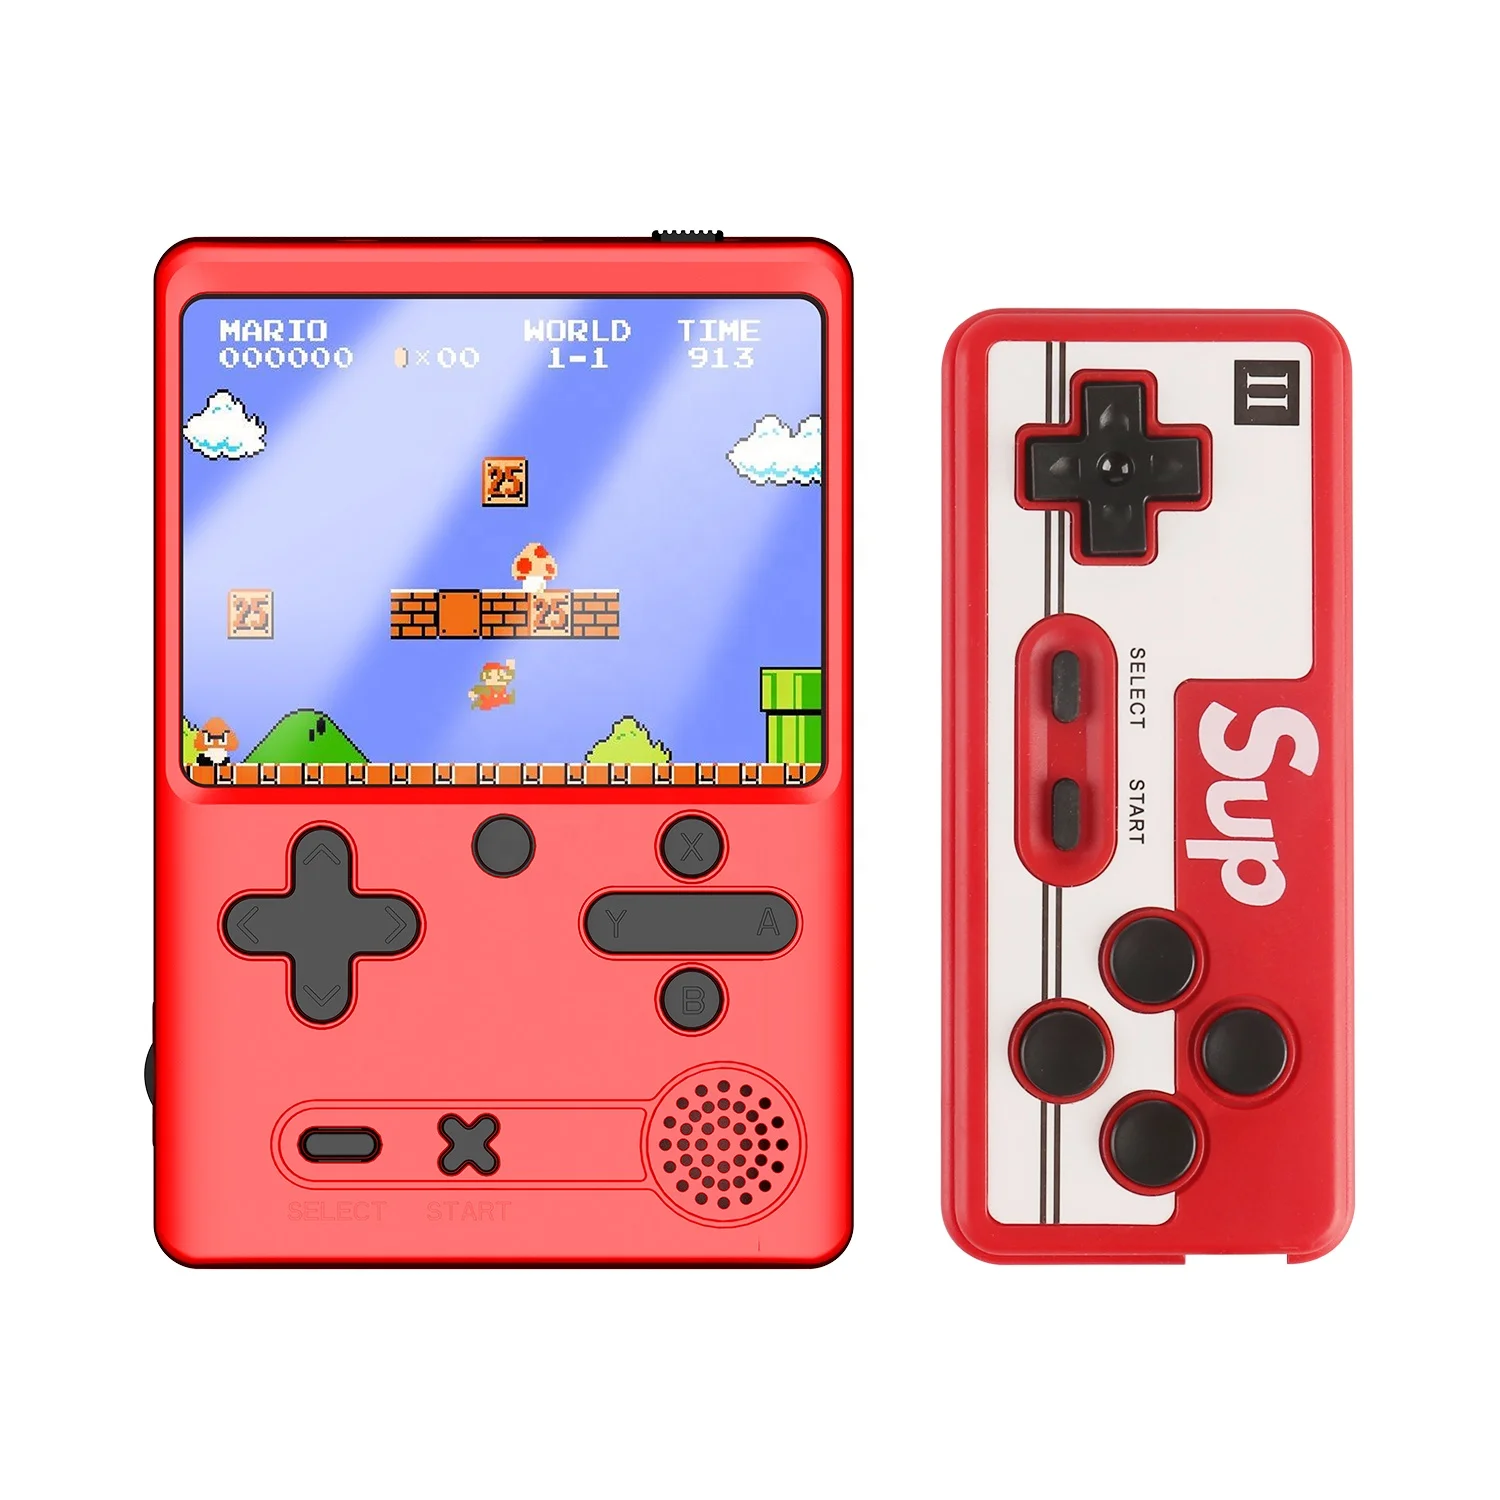 

2021 M6 Classic video nostalgic TV single double players handheld FC 500 in 1 SUP m6 retro game console